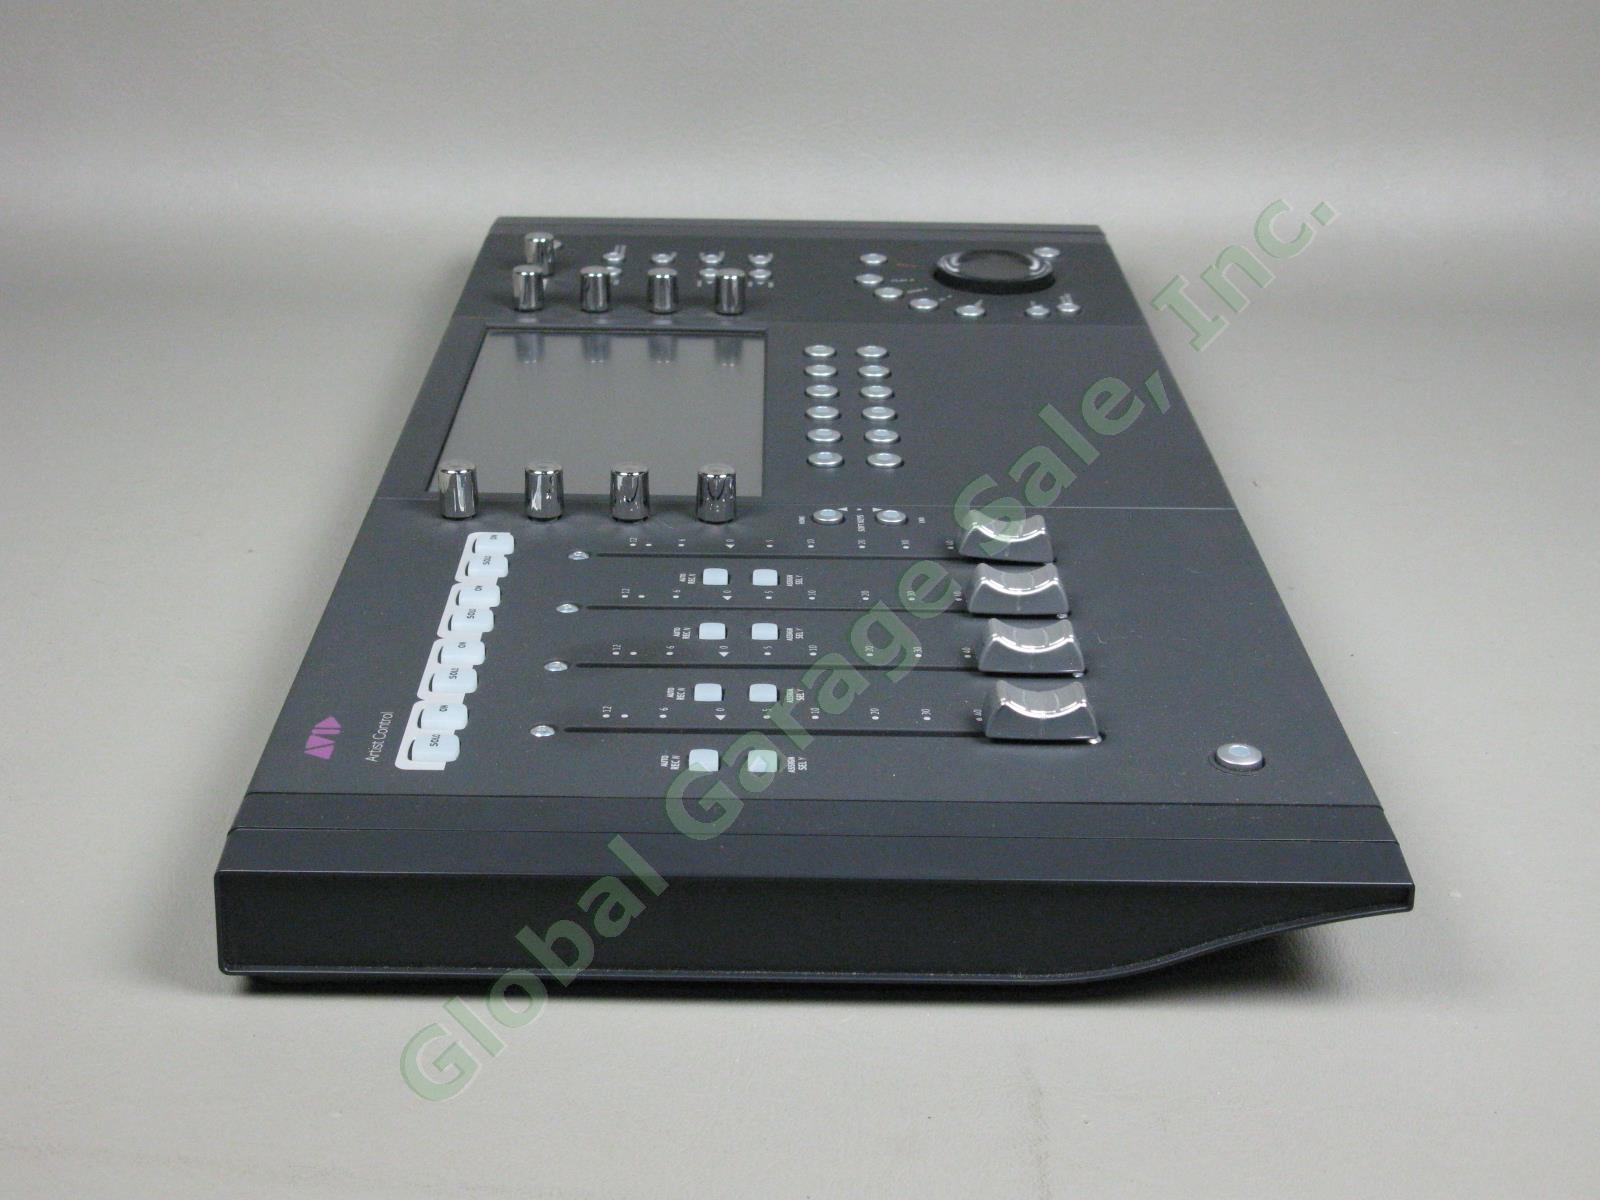 Avid Euphonix Artist Series 4-Fader Touchscreen Control Surface V2 One Owner EXC 4